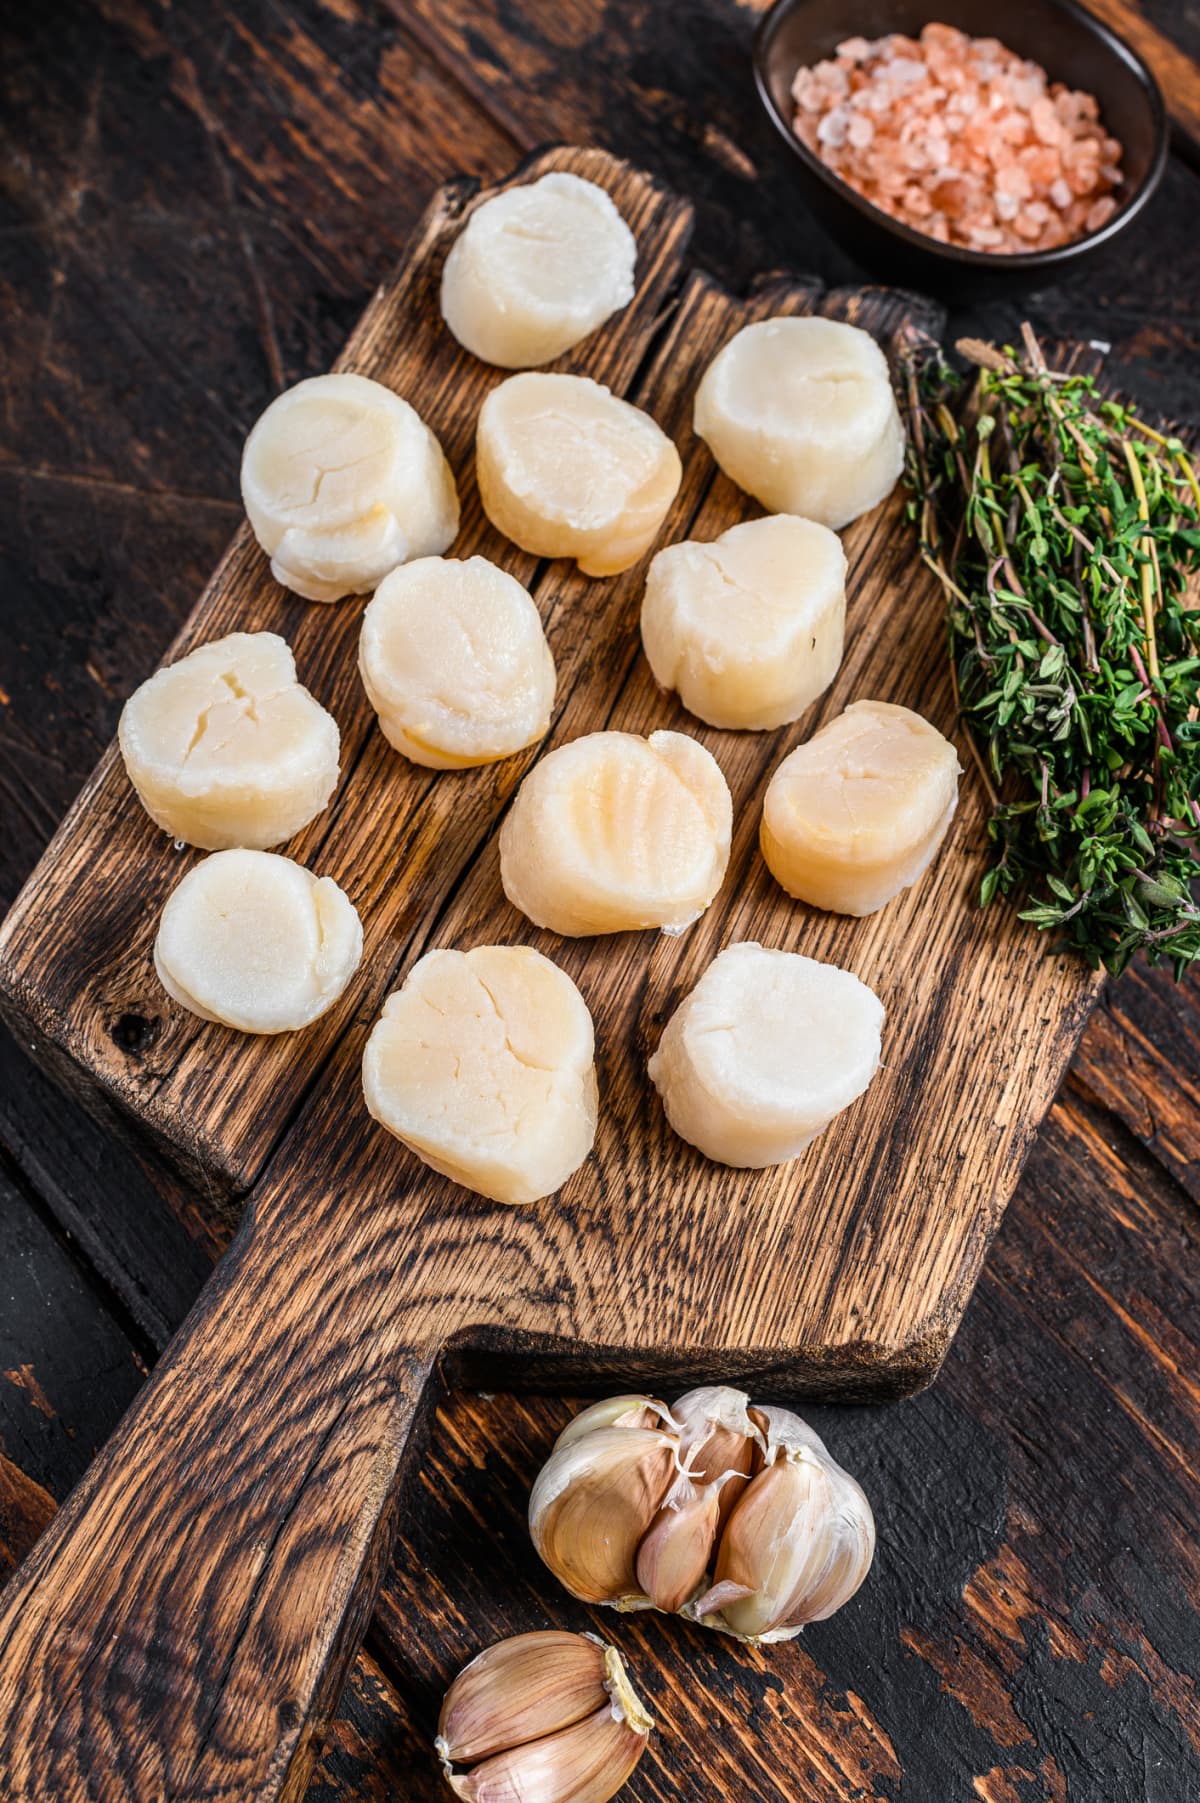 Pan Searing Scallops in Butter, olive oil and fresh garlic and thyme -Photographed on Hasselblad H3D2-39mb Camera